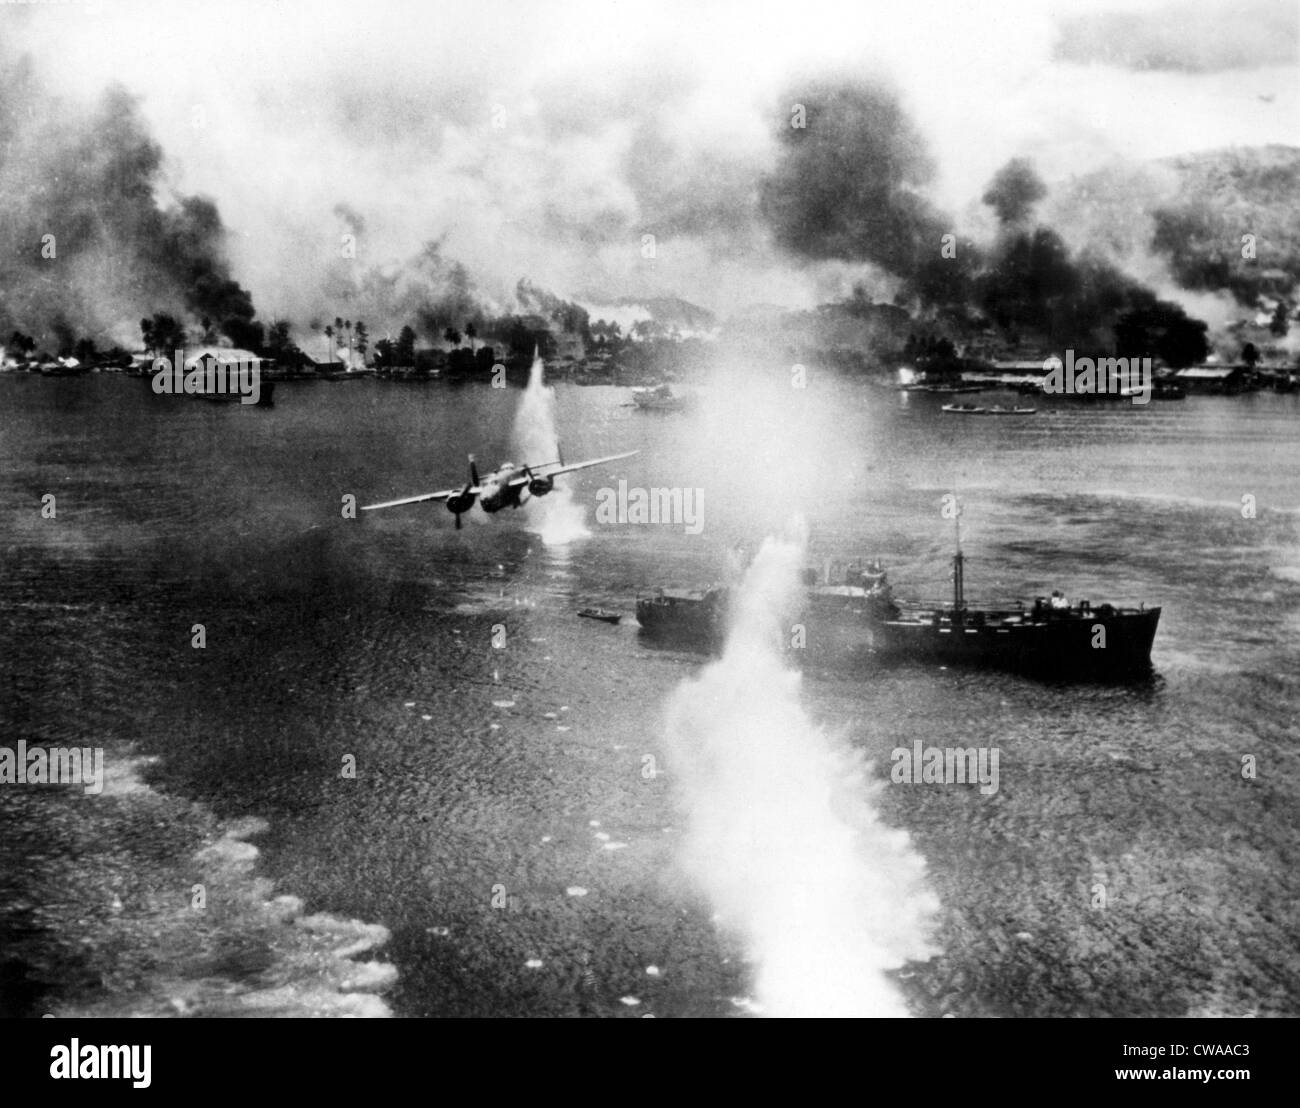 At the Harbor of Rabayl, a bombing of a Japanese ship (in foreground). The white plulme in the center foreground is a Stock Photo